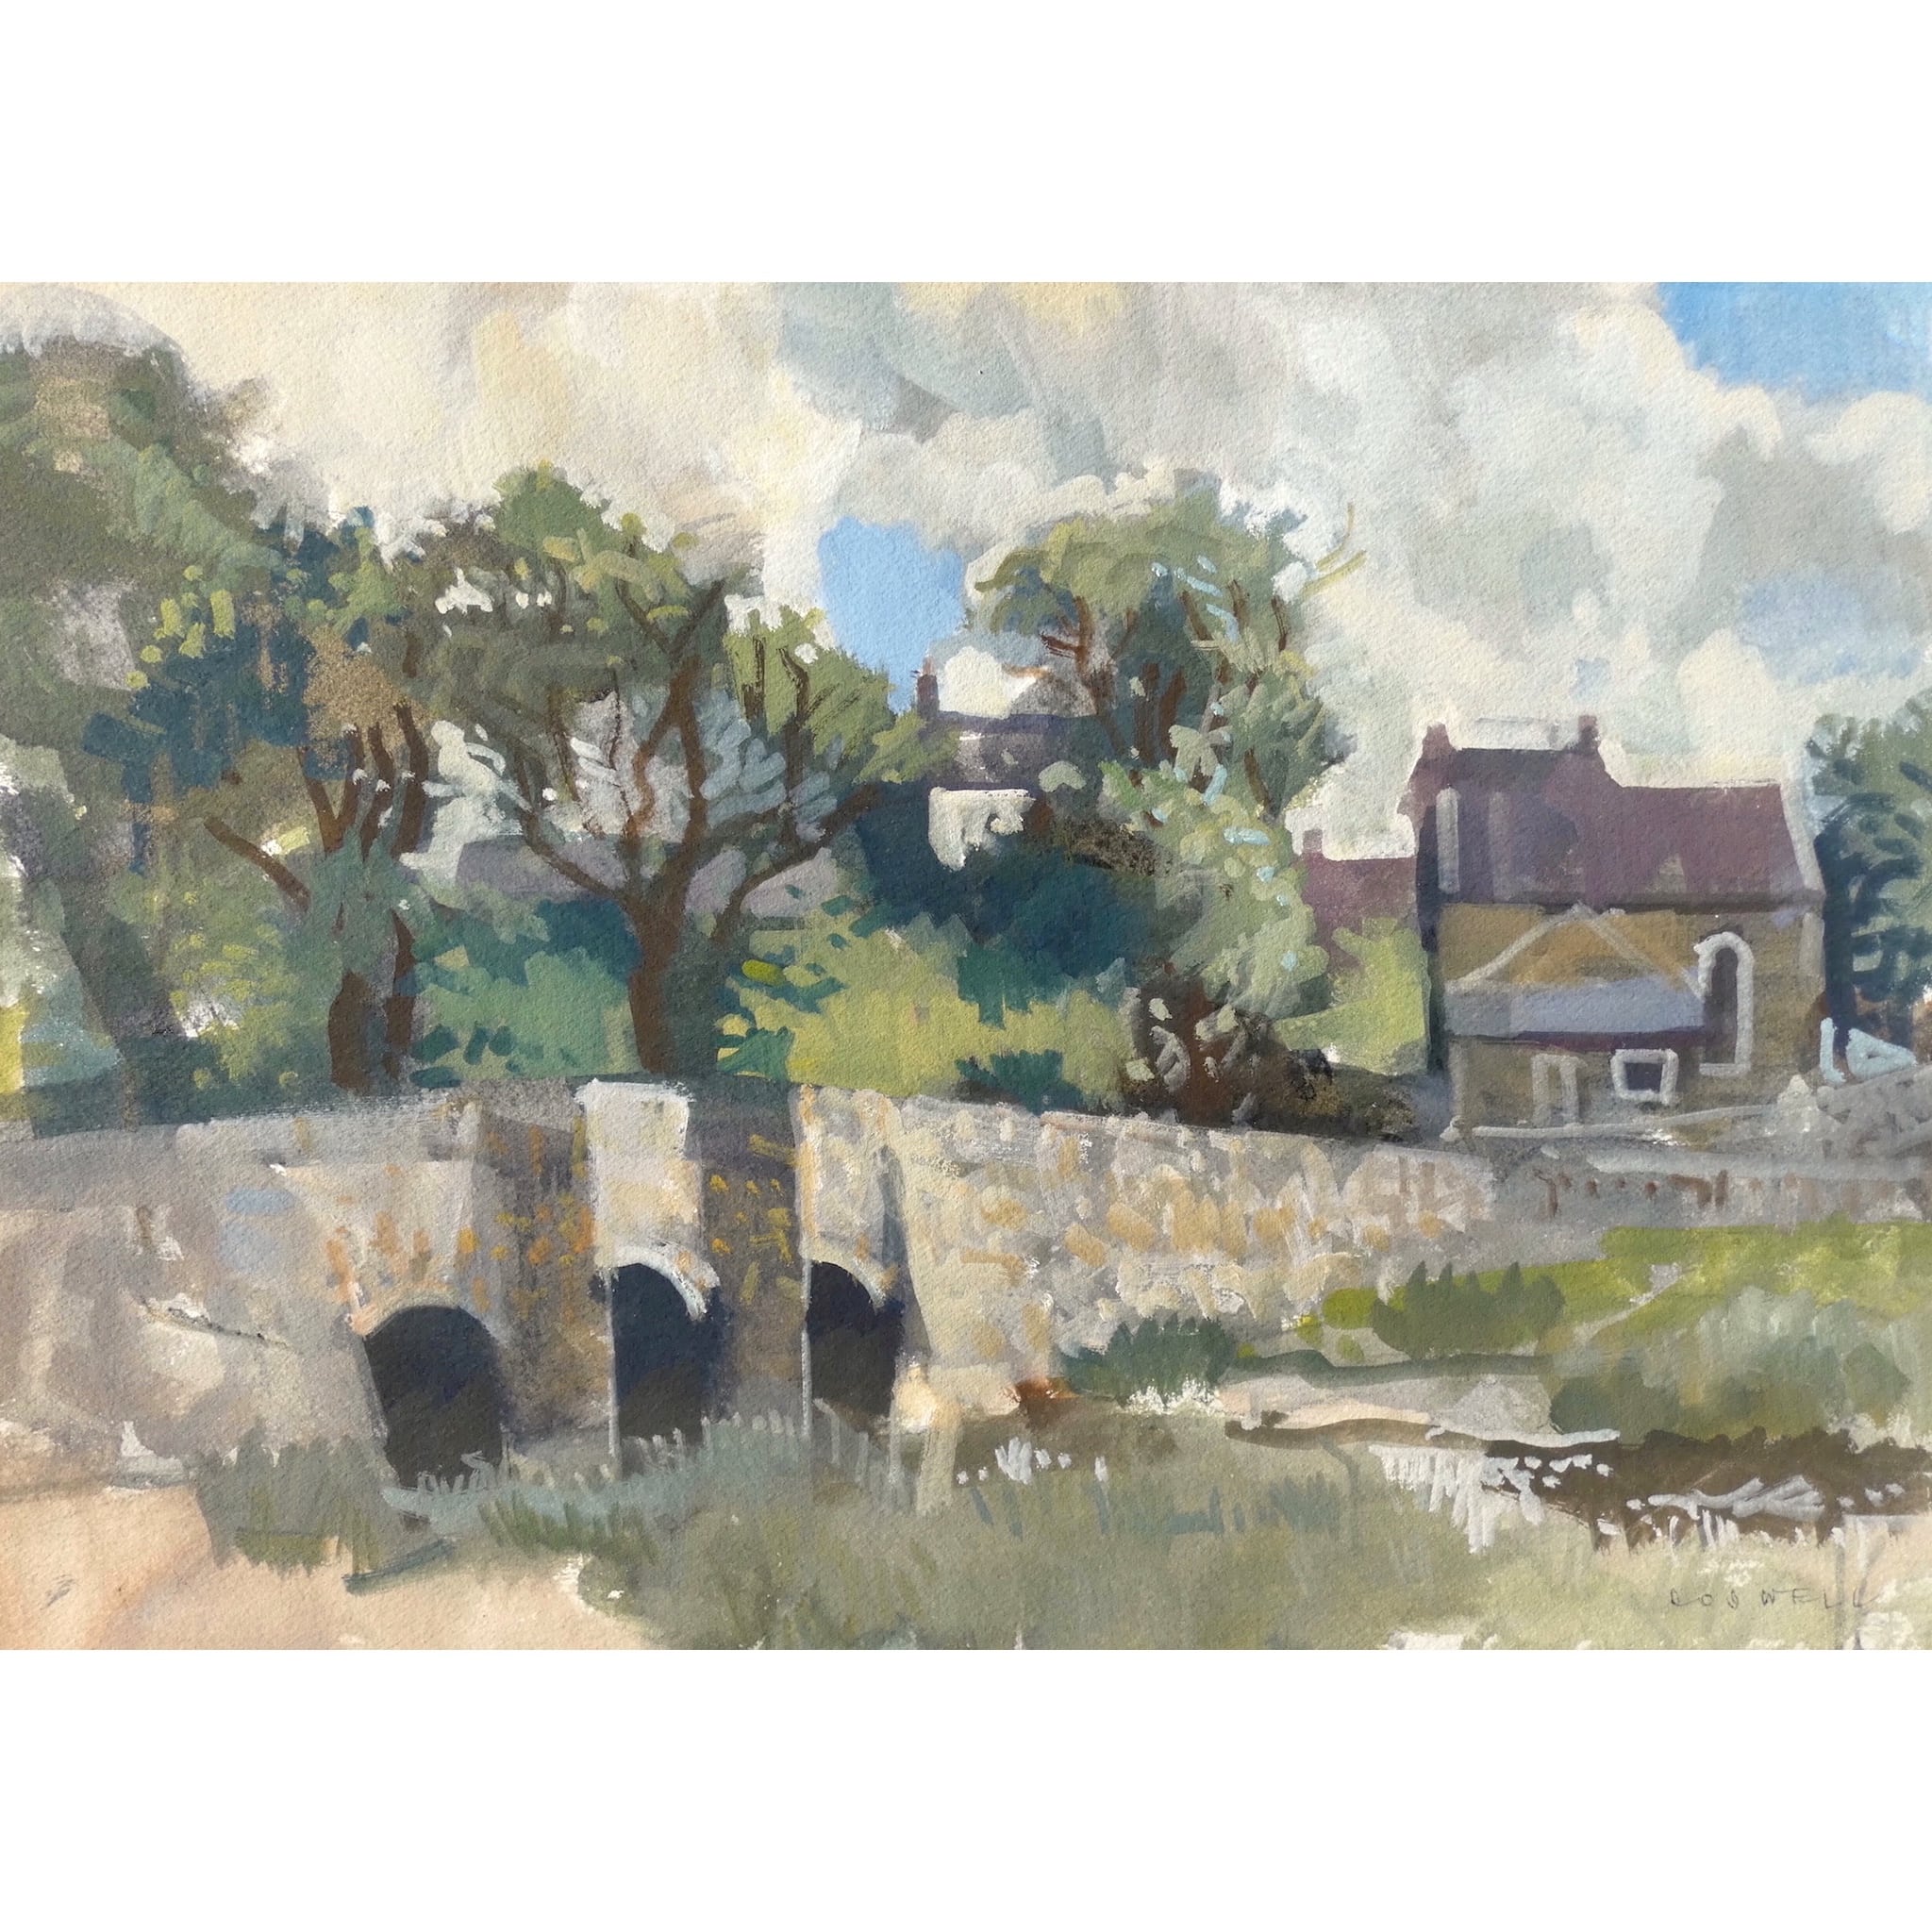 Painting of cottages, trees and a stone bridge by artist Sam Dodwell